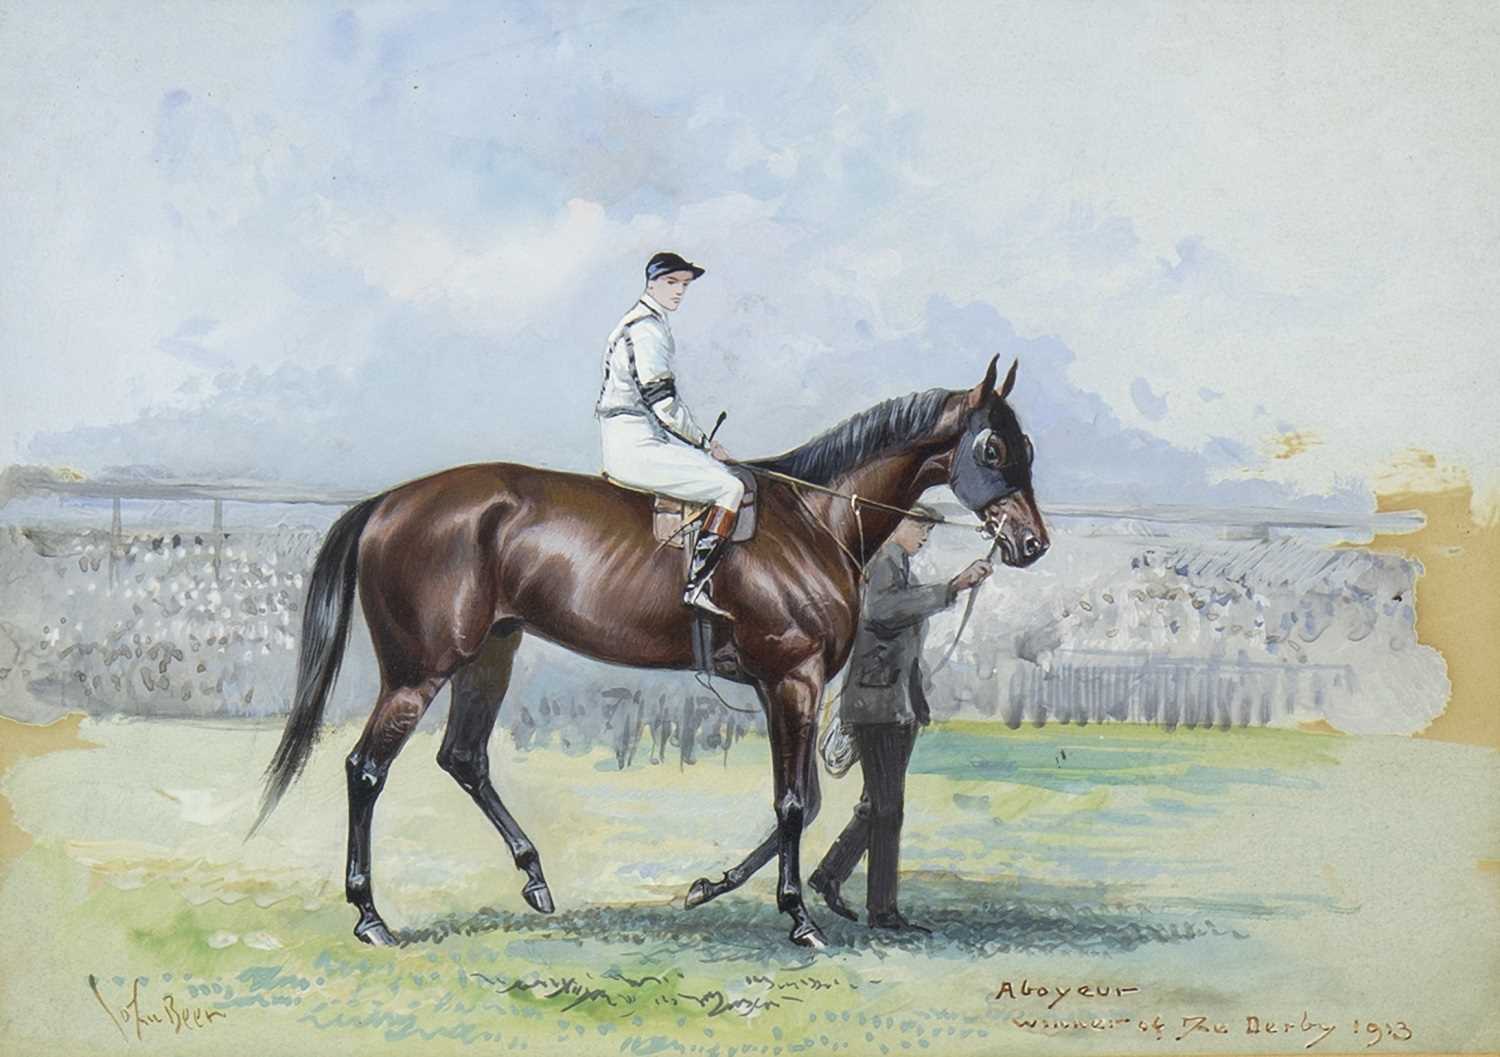 Lot 404 - STUDY OF ABOYEUR, WINNER OF THE DERBY, 1913, A WATERCOLOUR BY JOHN BEER